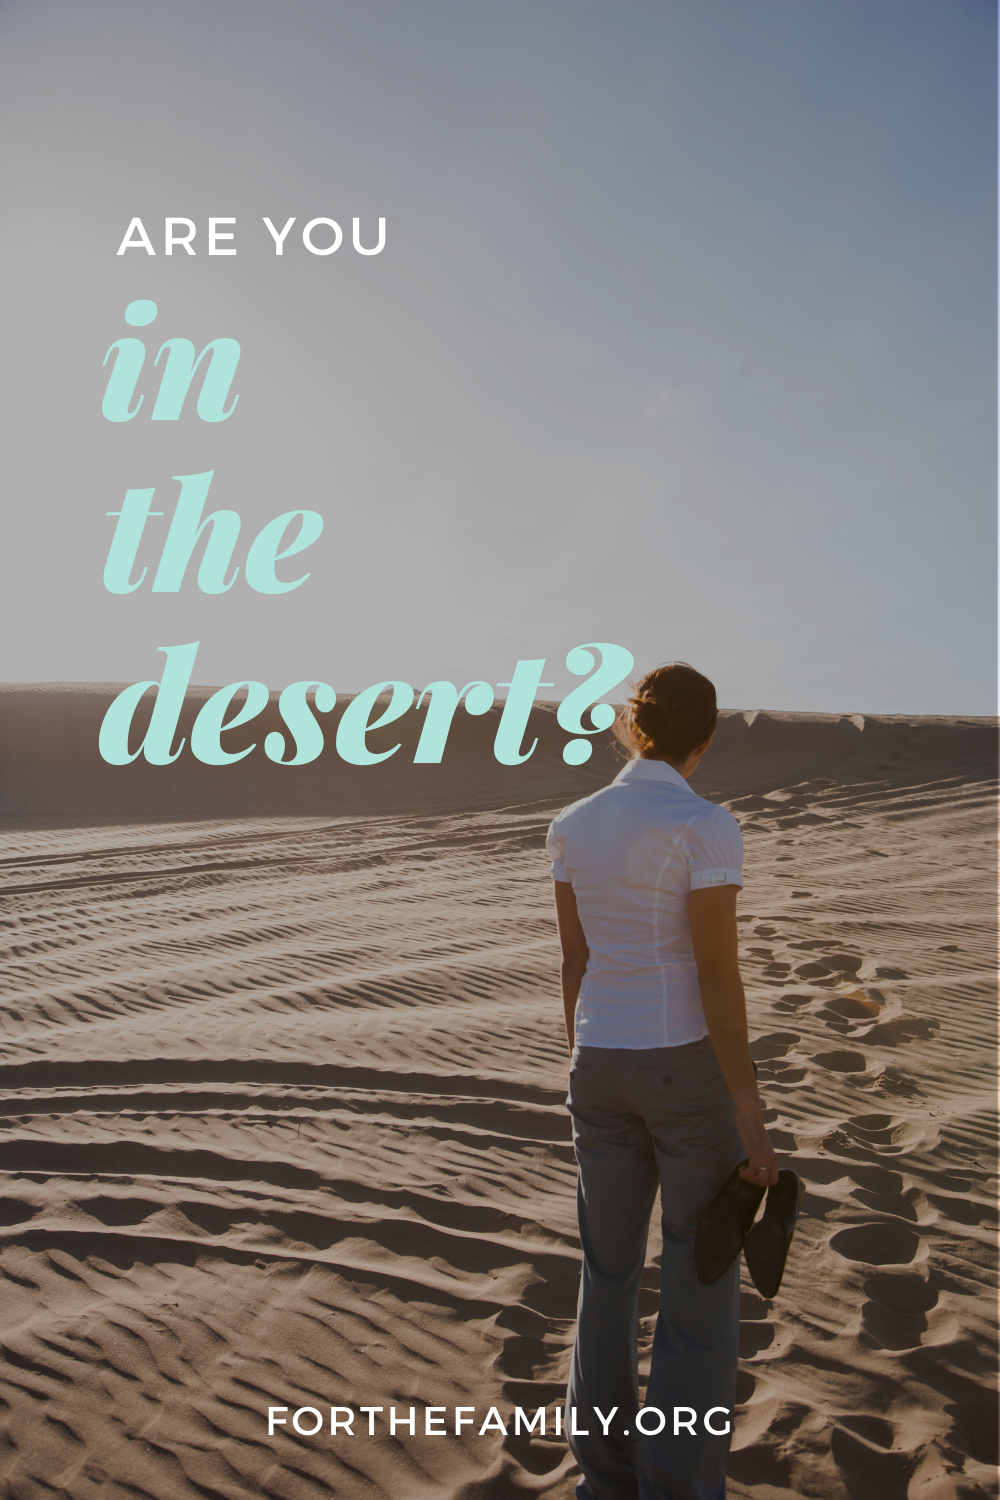 Are You in the Desert?